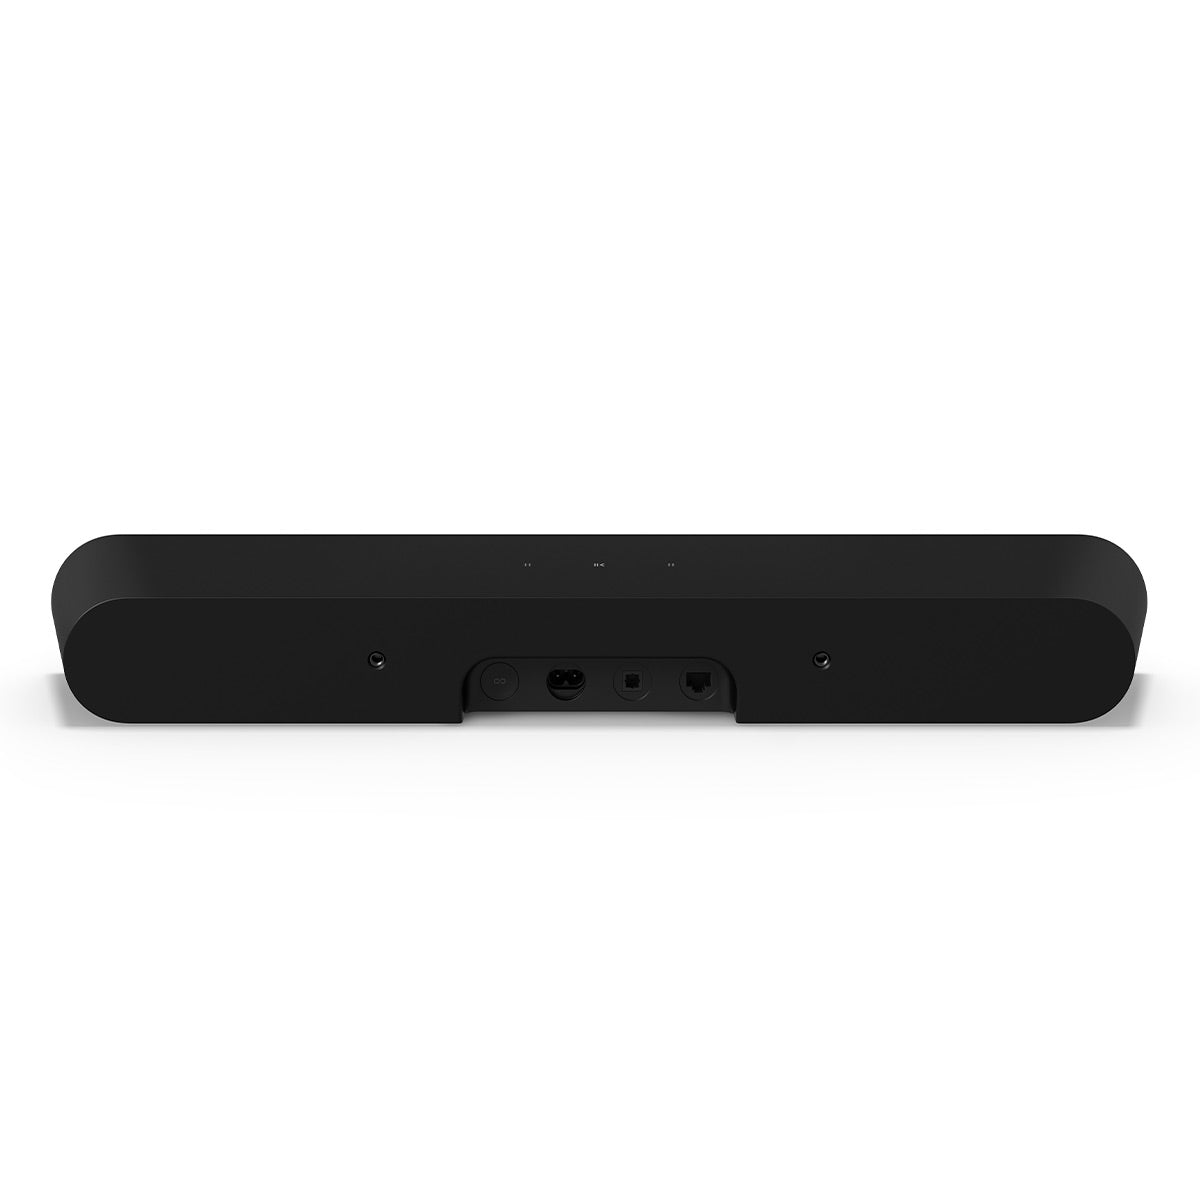 Sonos Surround Set with Ray Compact Soundbar and Pair of Era 100 Wireless Smart Speakers (Black)